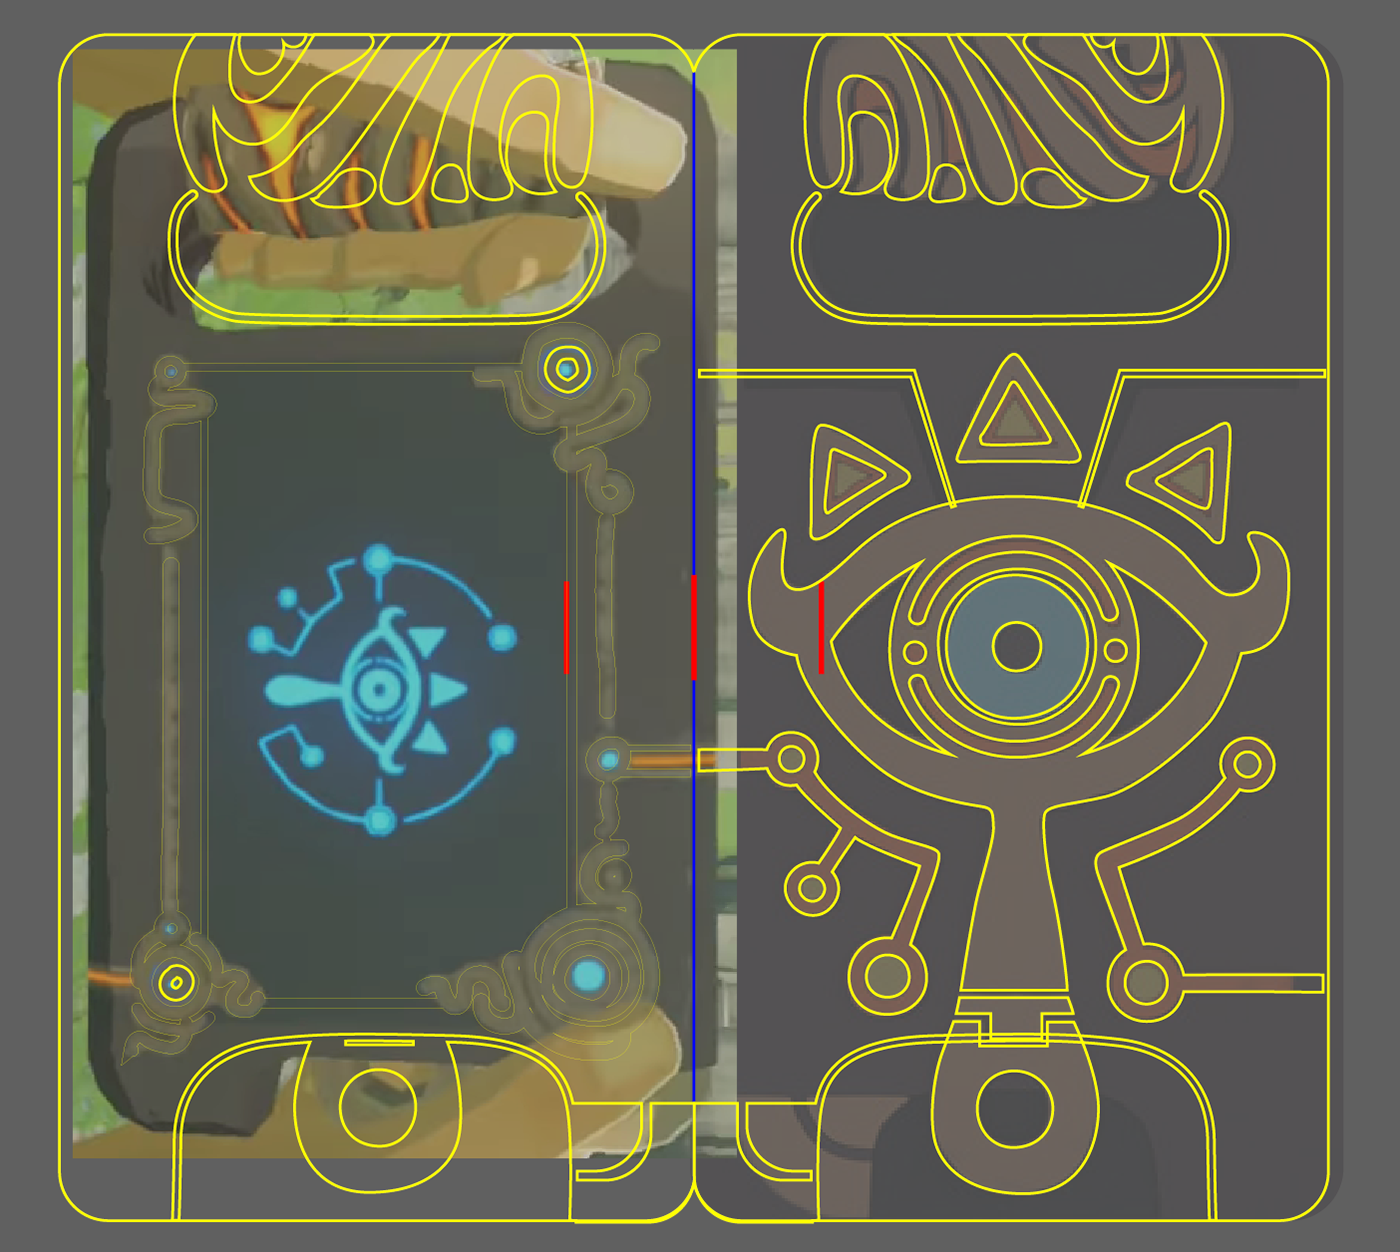 Then you trace the Sheikah slate design for the outside of the card because...